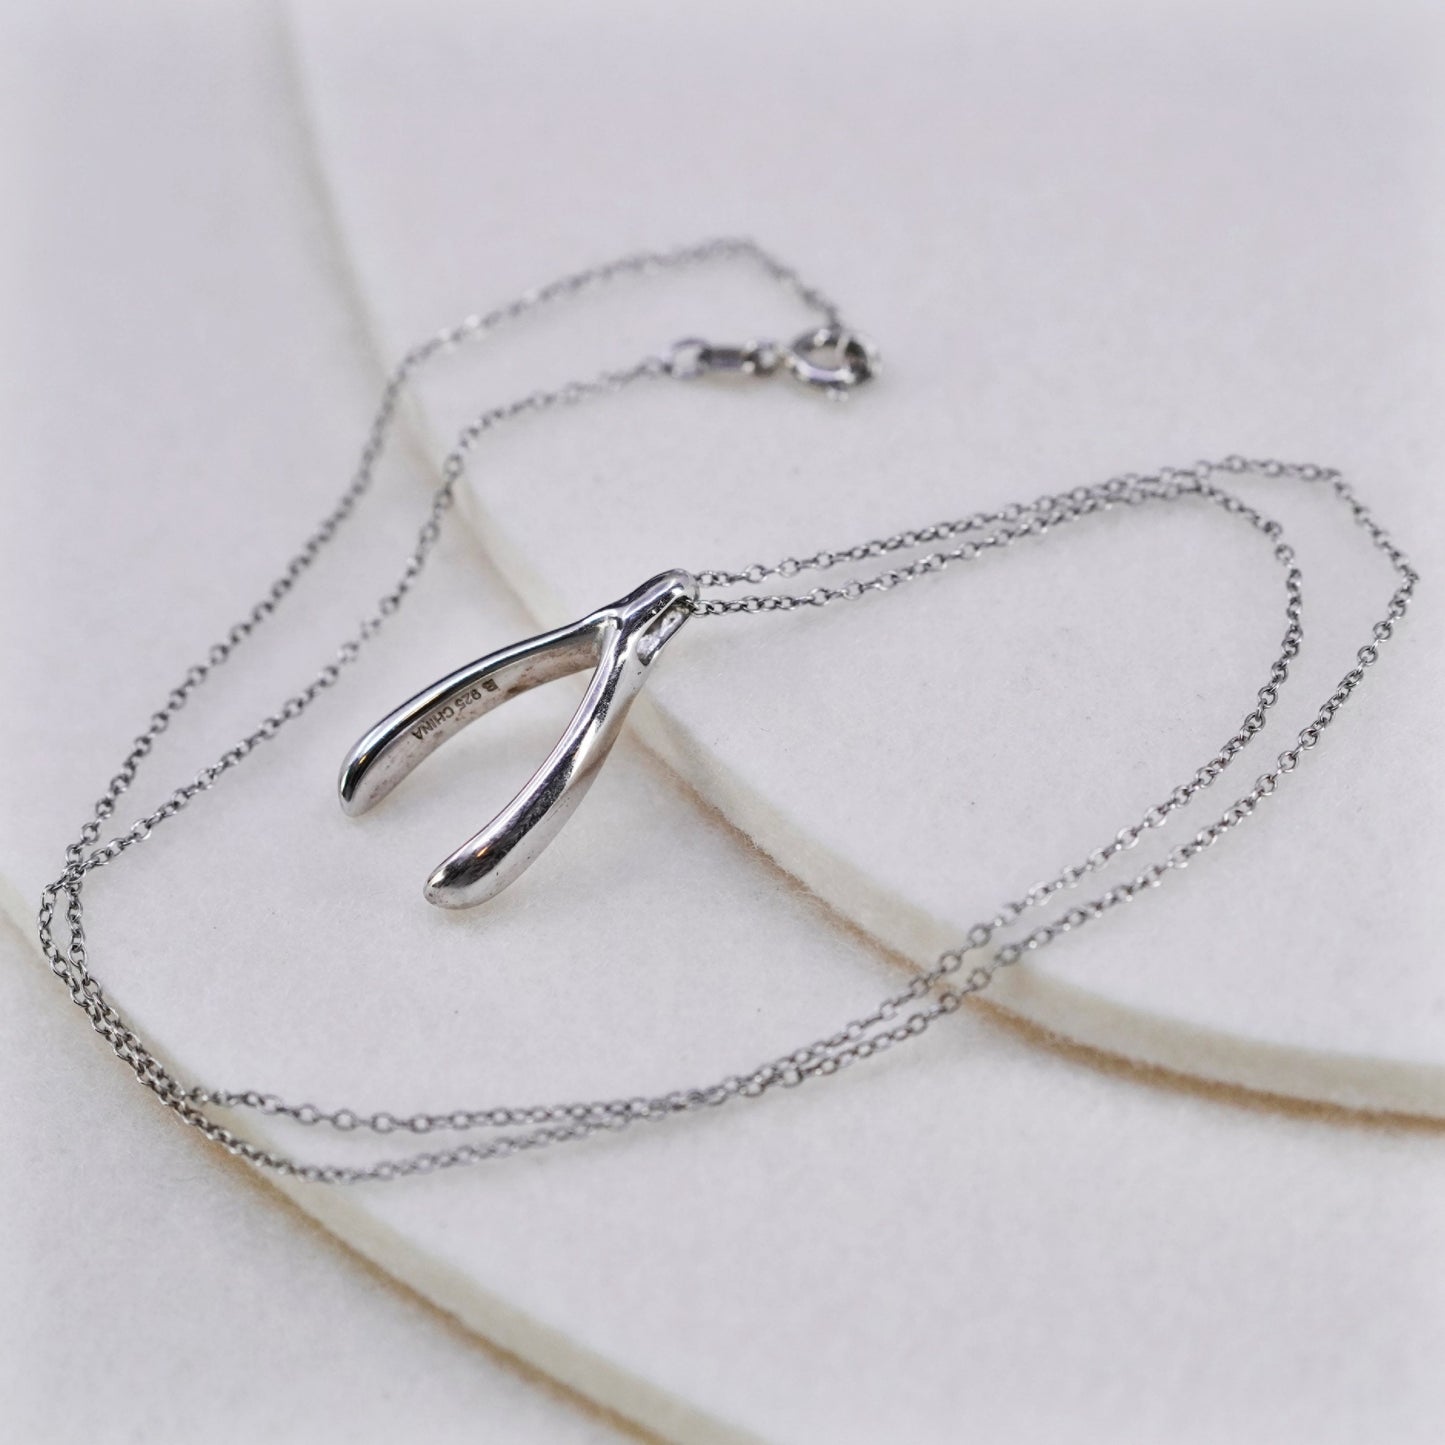 18”, vintage Sterling 925 silver handmade circle necklace with wishbone pendant